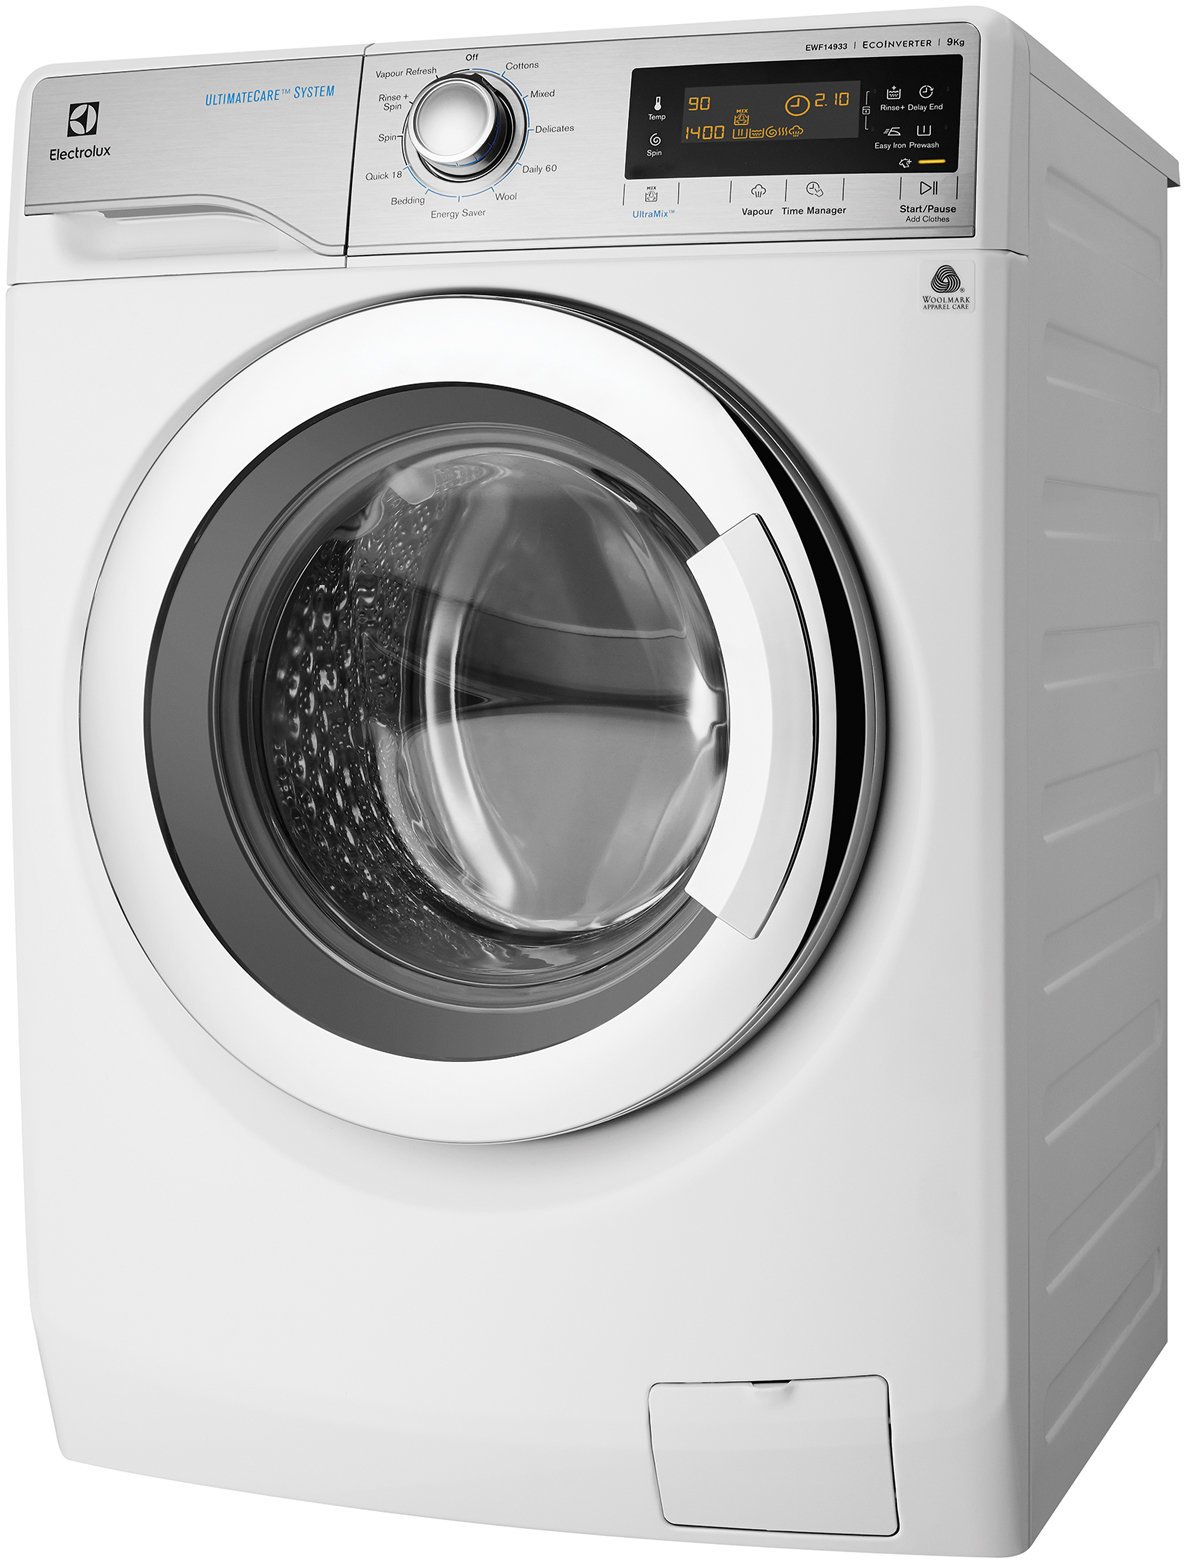 Top 10 Best Washing Machines in India Top Load & Front Load Reviews